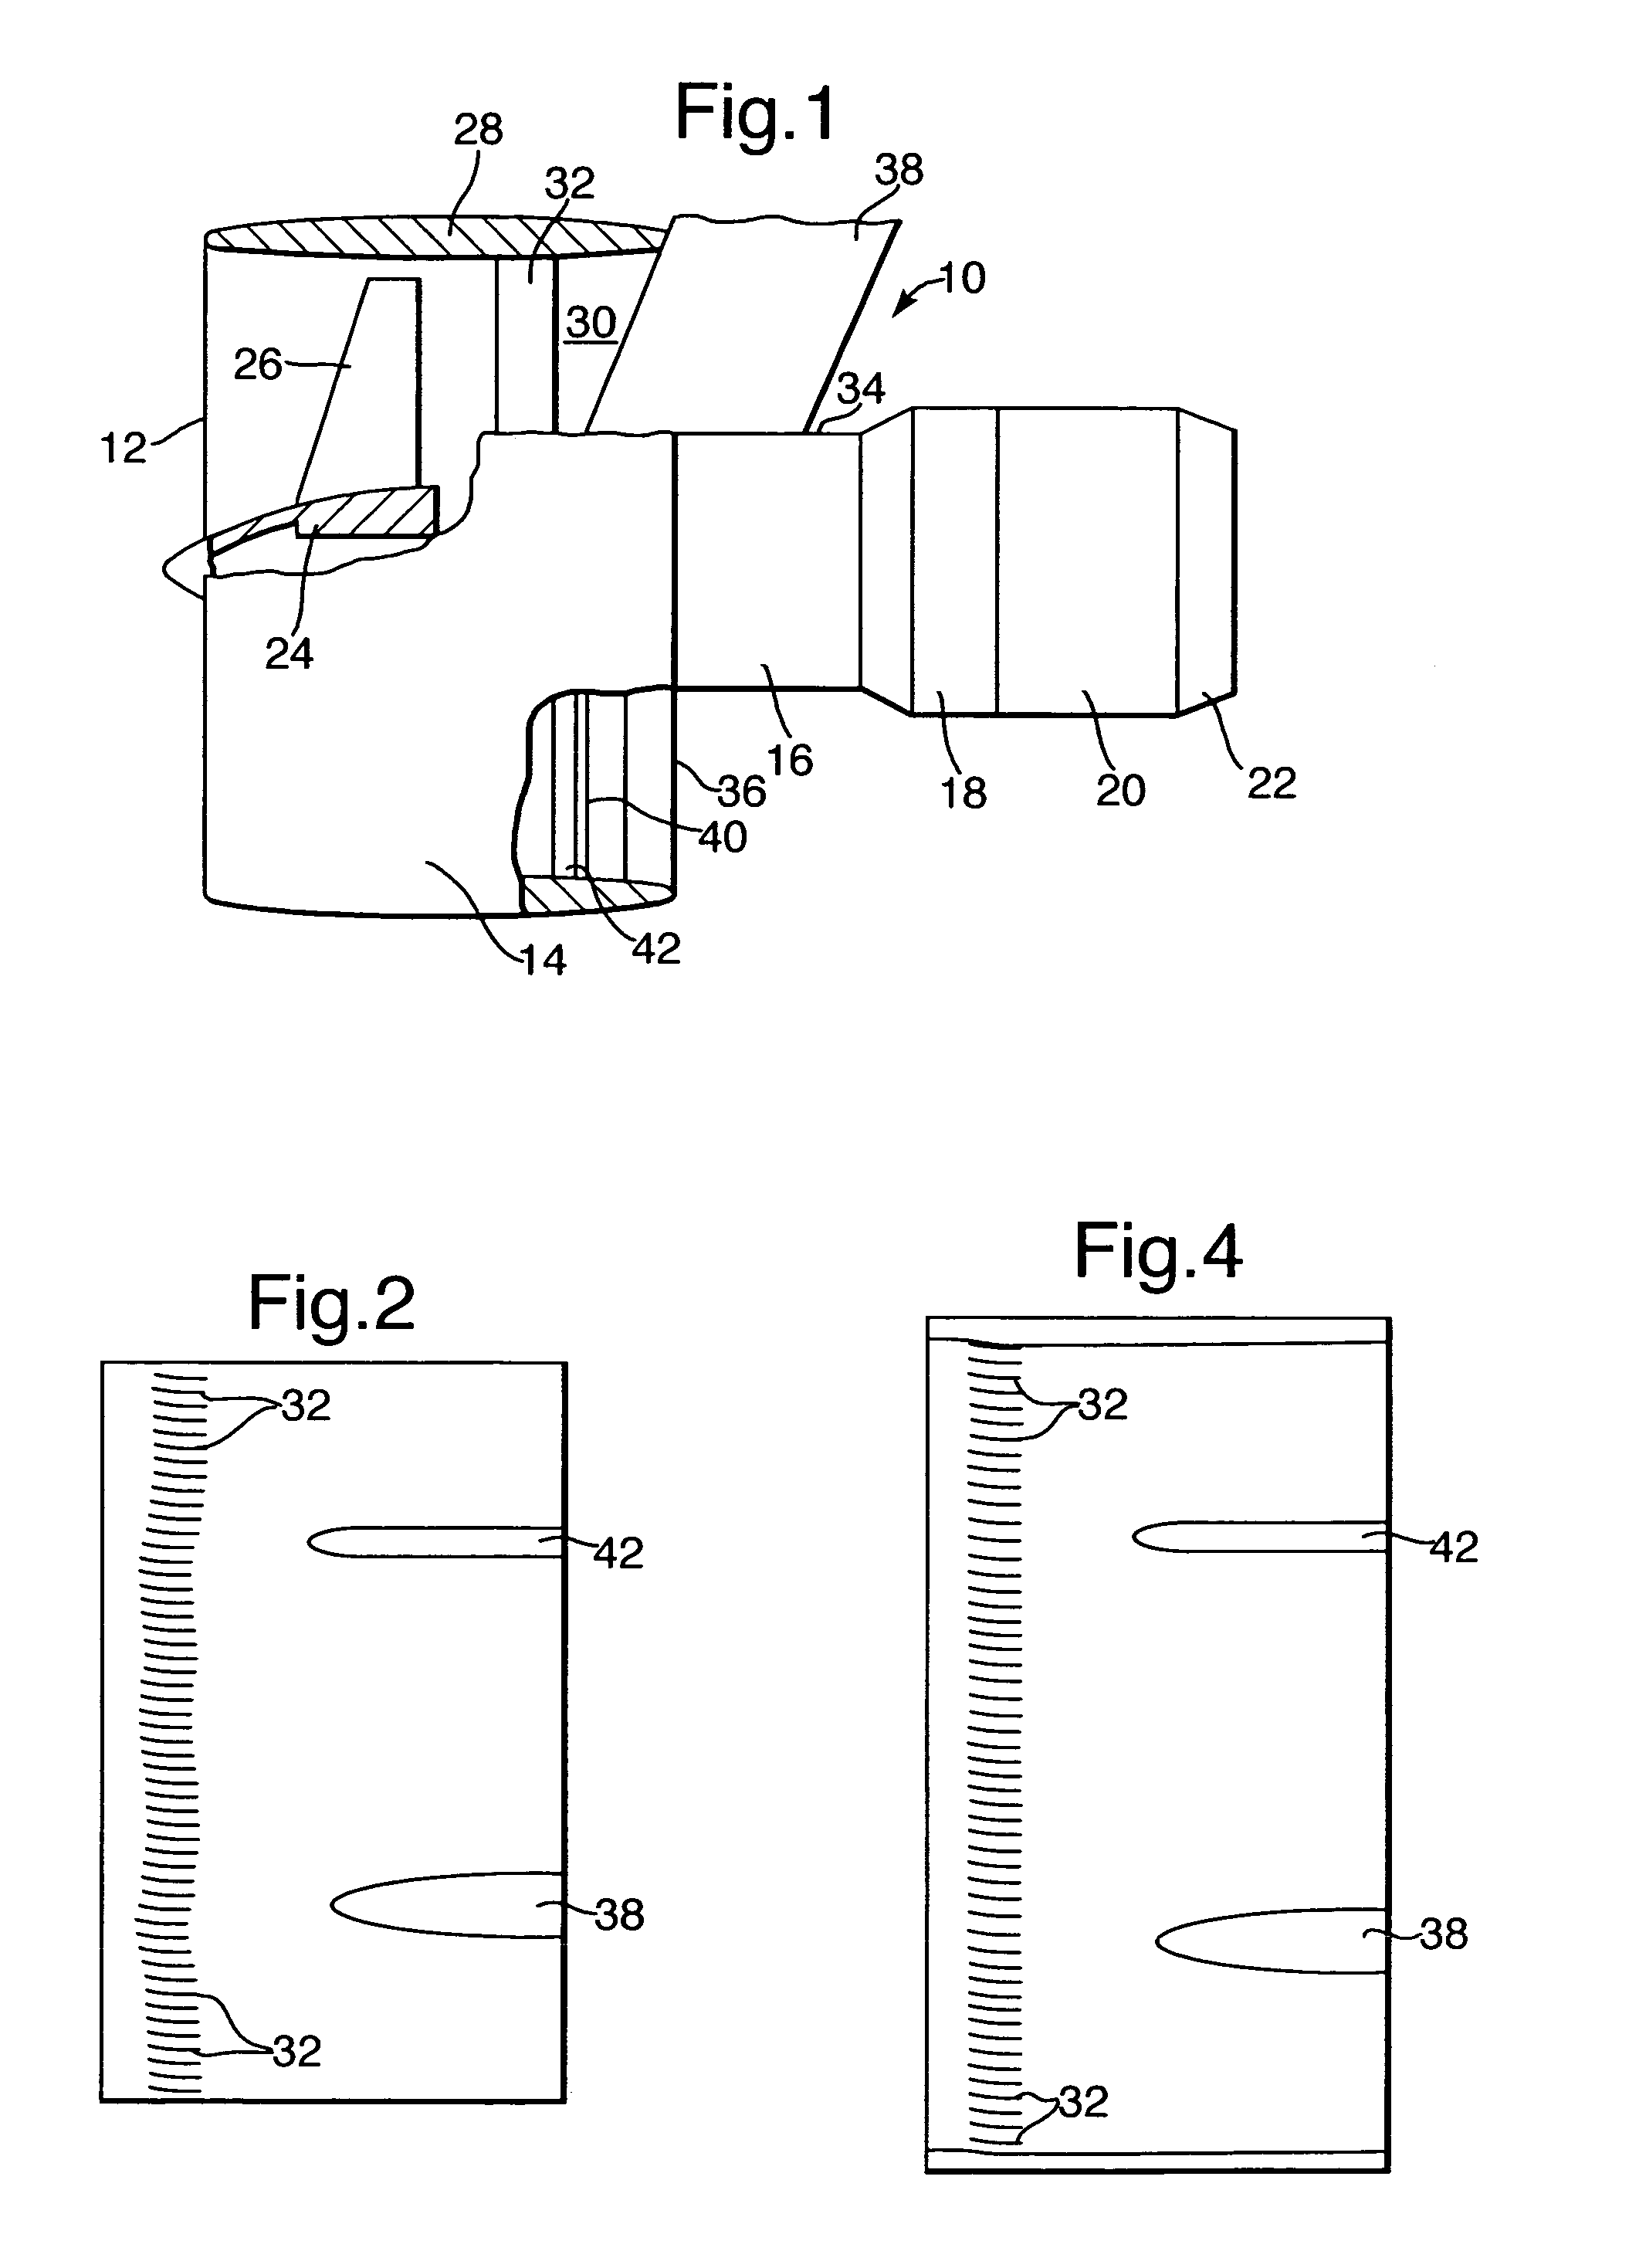 Stator vane assembly for a turbomachine